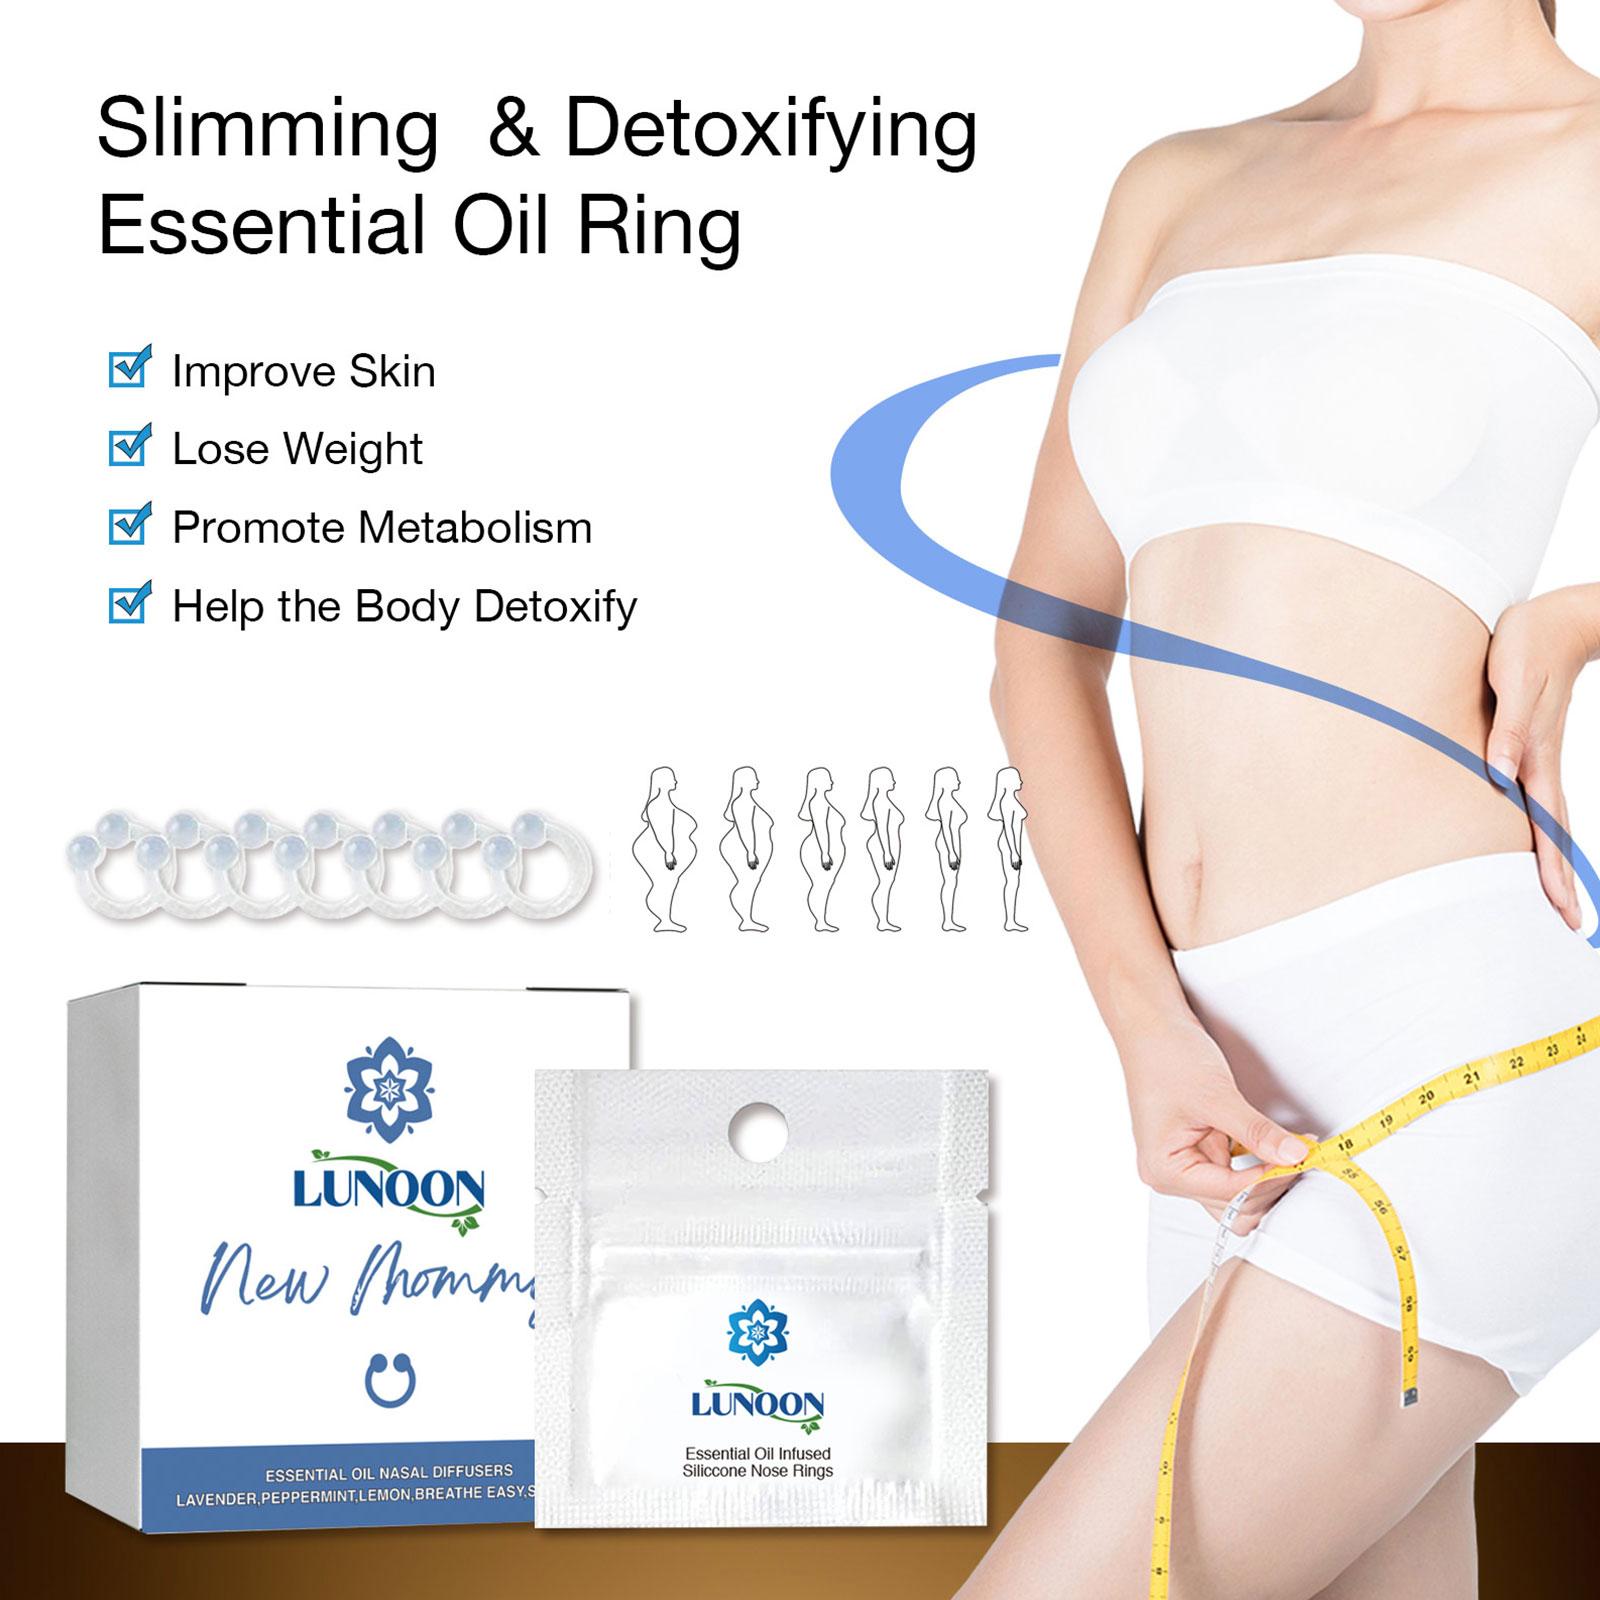 Lunoon™ Slimming & Detoxifying Essential Oil Ring - Givemethisnow